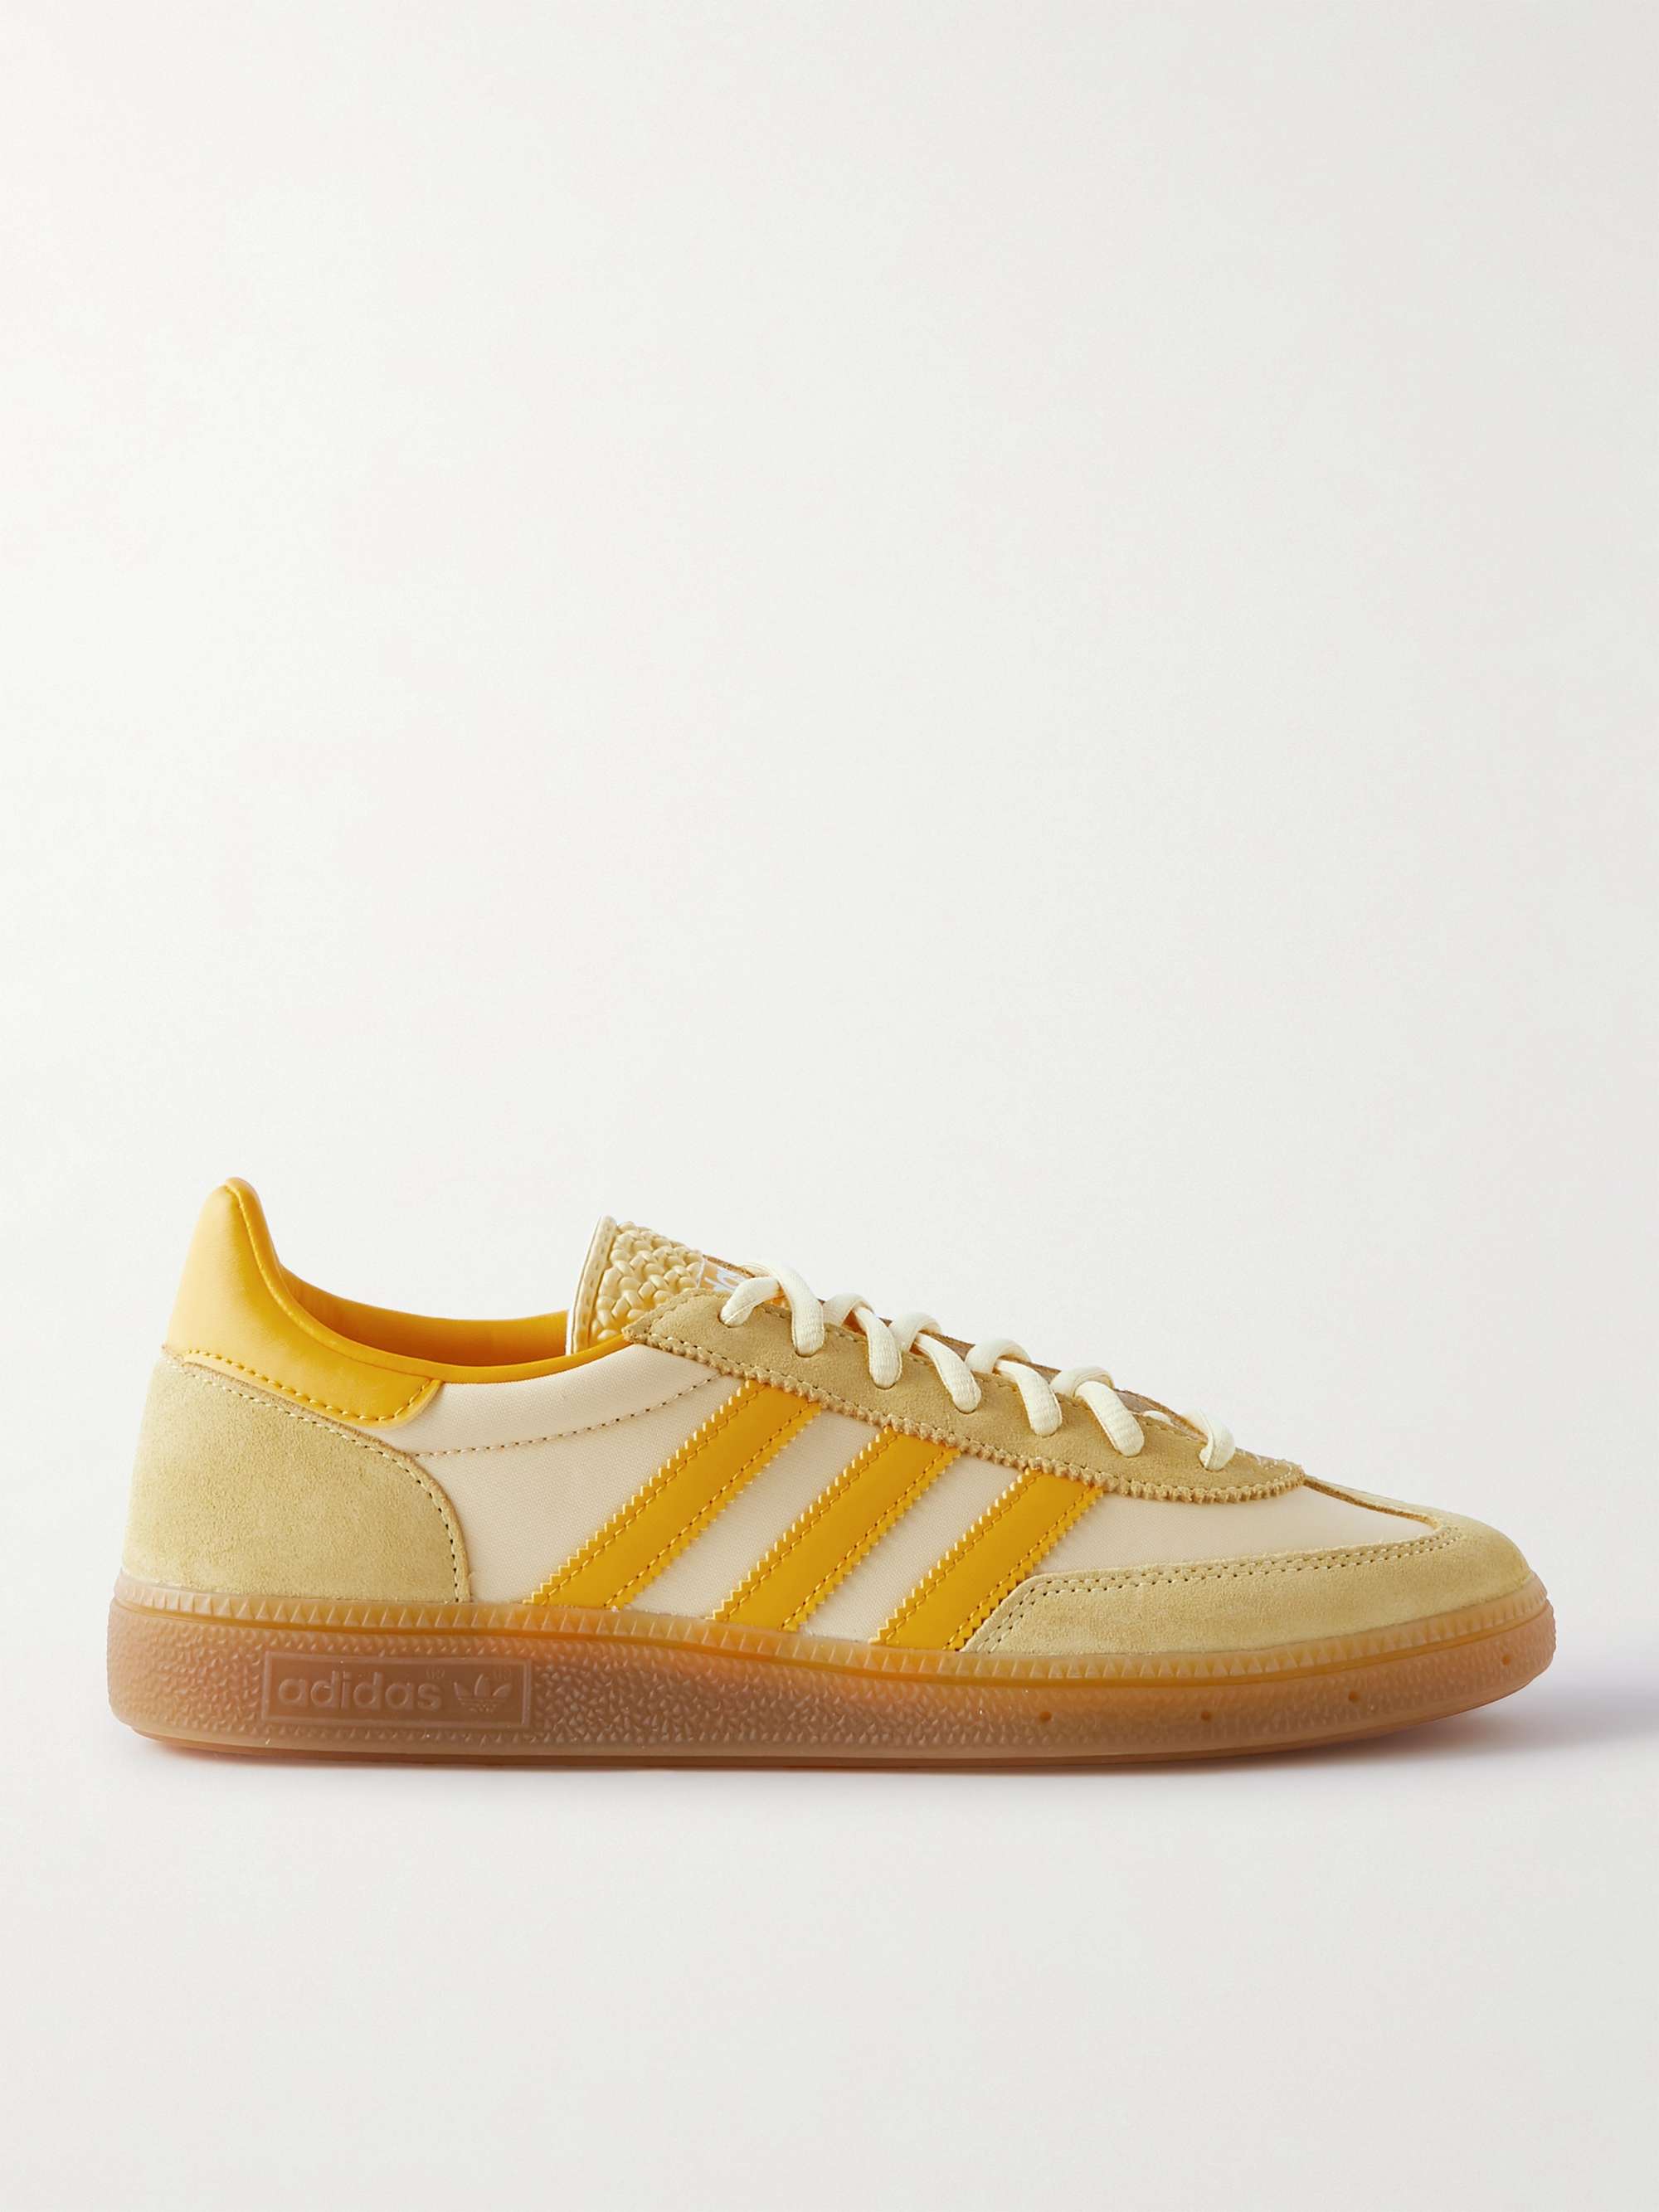 ADIDAS ORIGINALS Handball Spezial Leather-Trimmed Nylon and Suede Sneakers  | MR PORTER